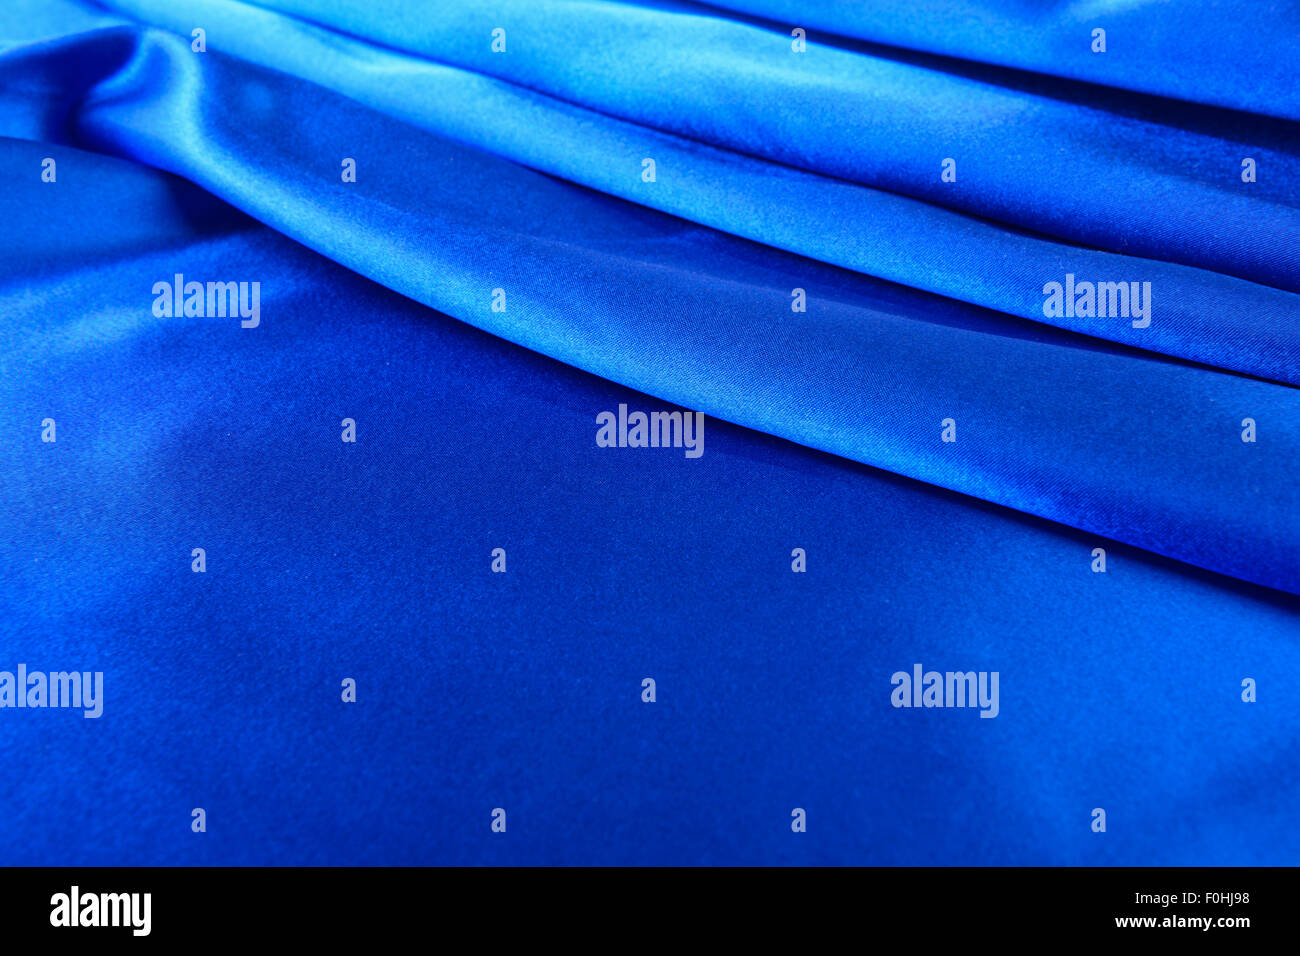 Abstract blue background luxury cloth Stock Photo